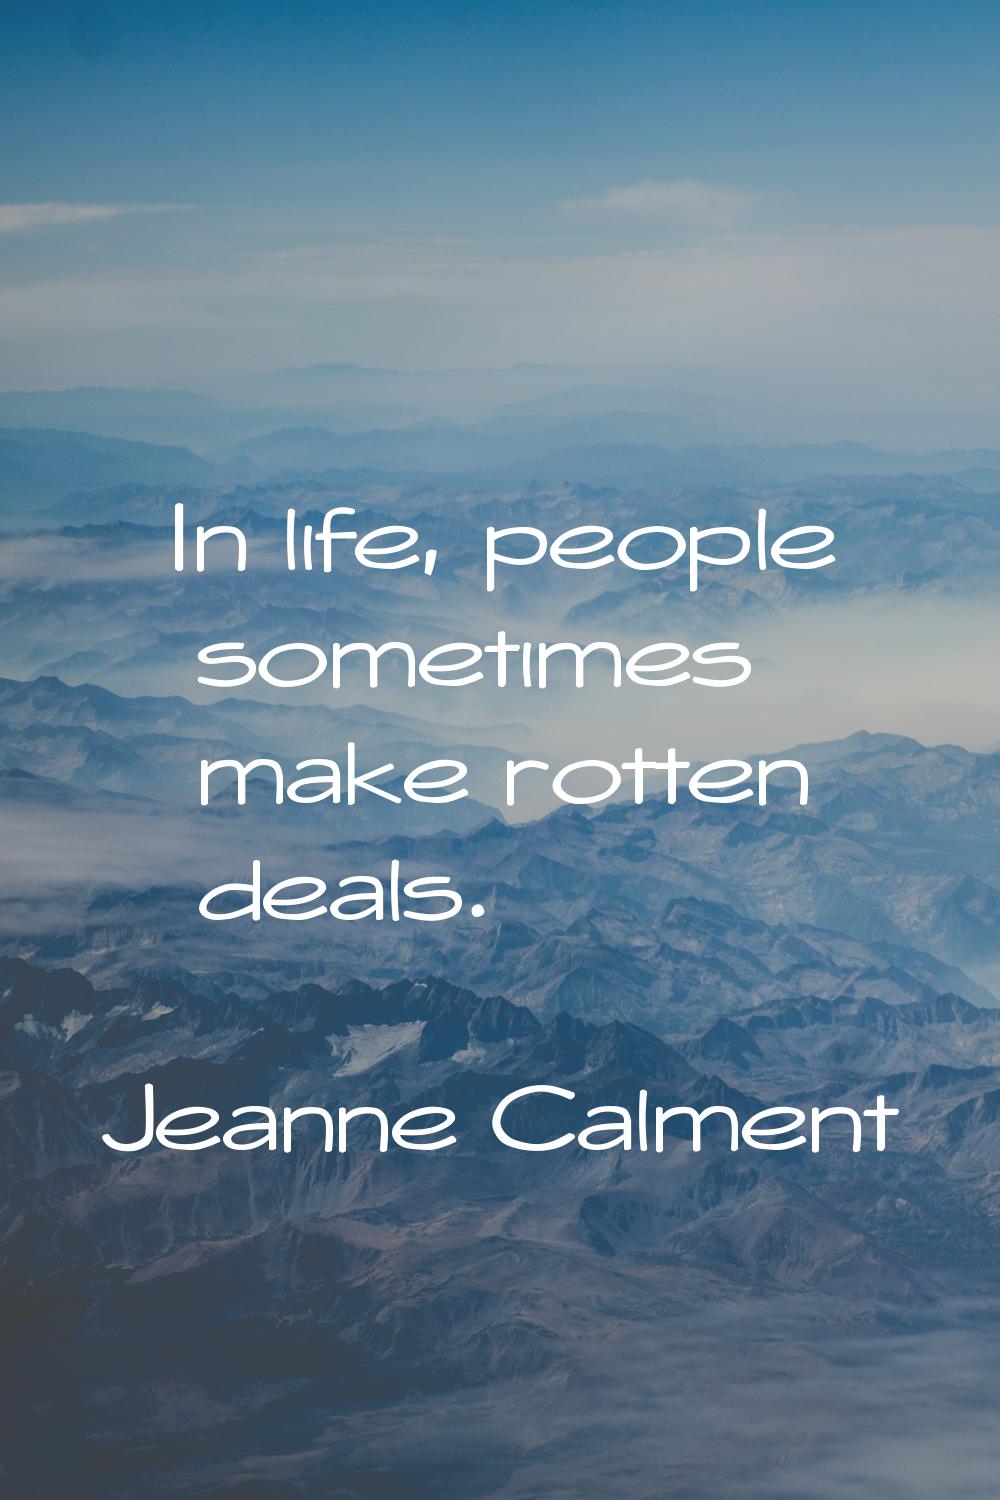 In life, people sometimes make rotten deals.